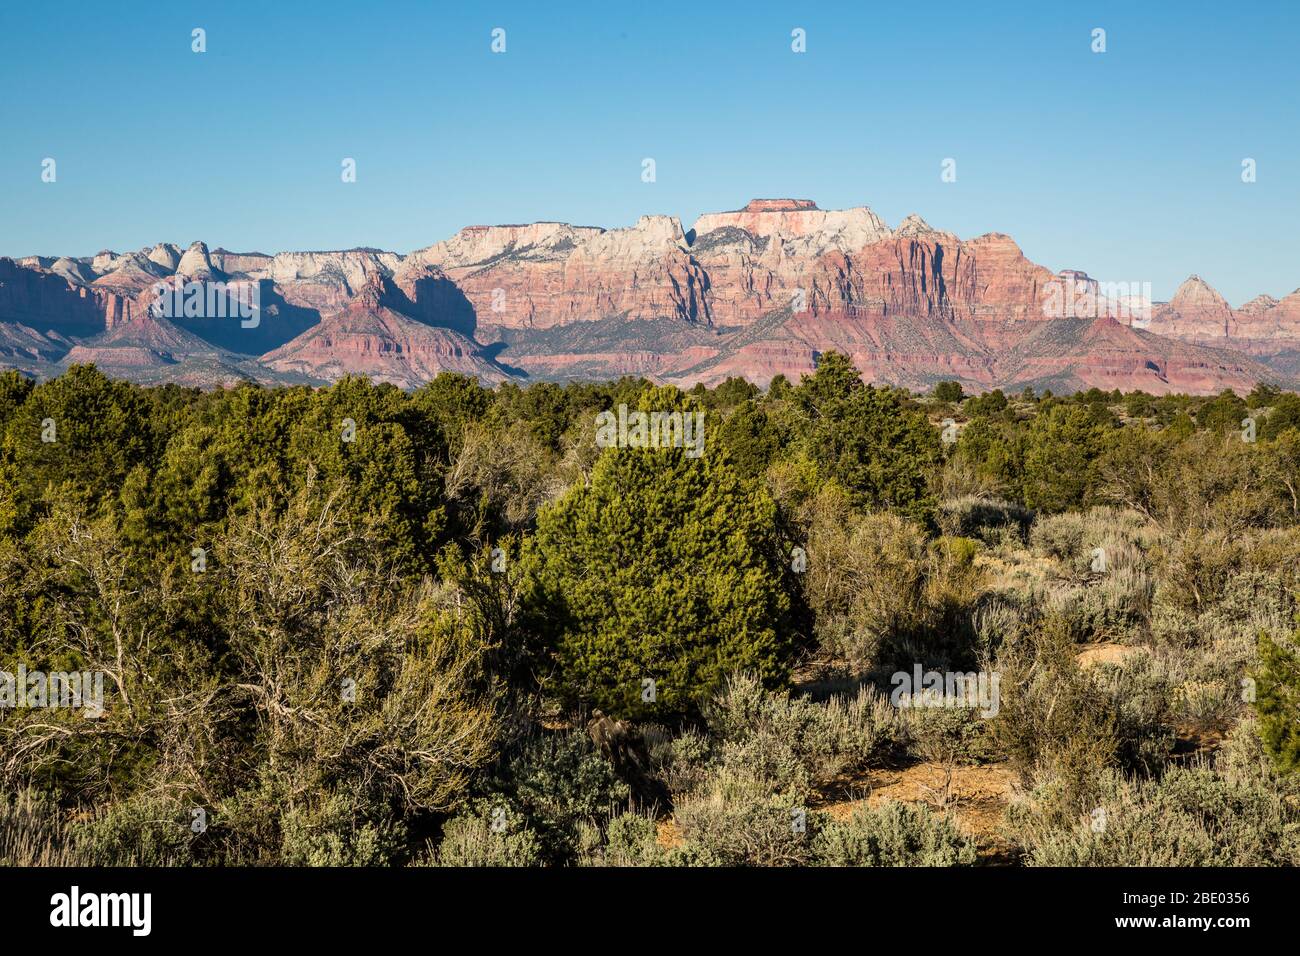 Green sagebrush, pinyon pine and juniper trees in spring below massive red rock cliffs of Zion National Park. Stock Photo